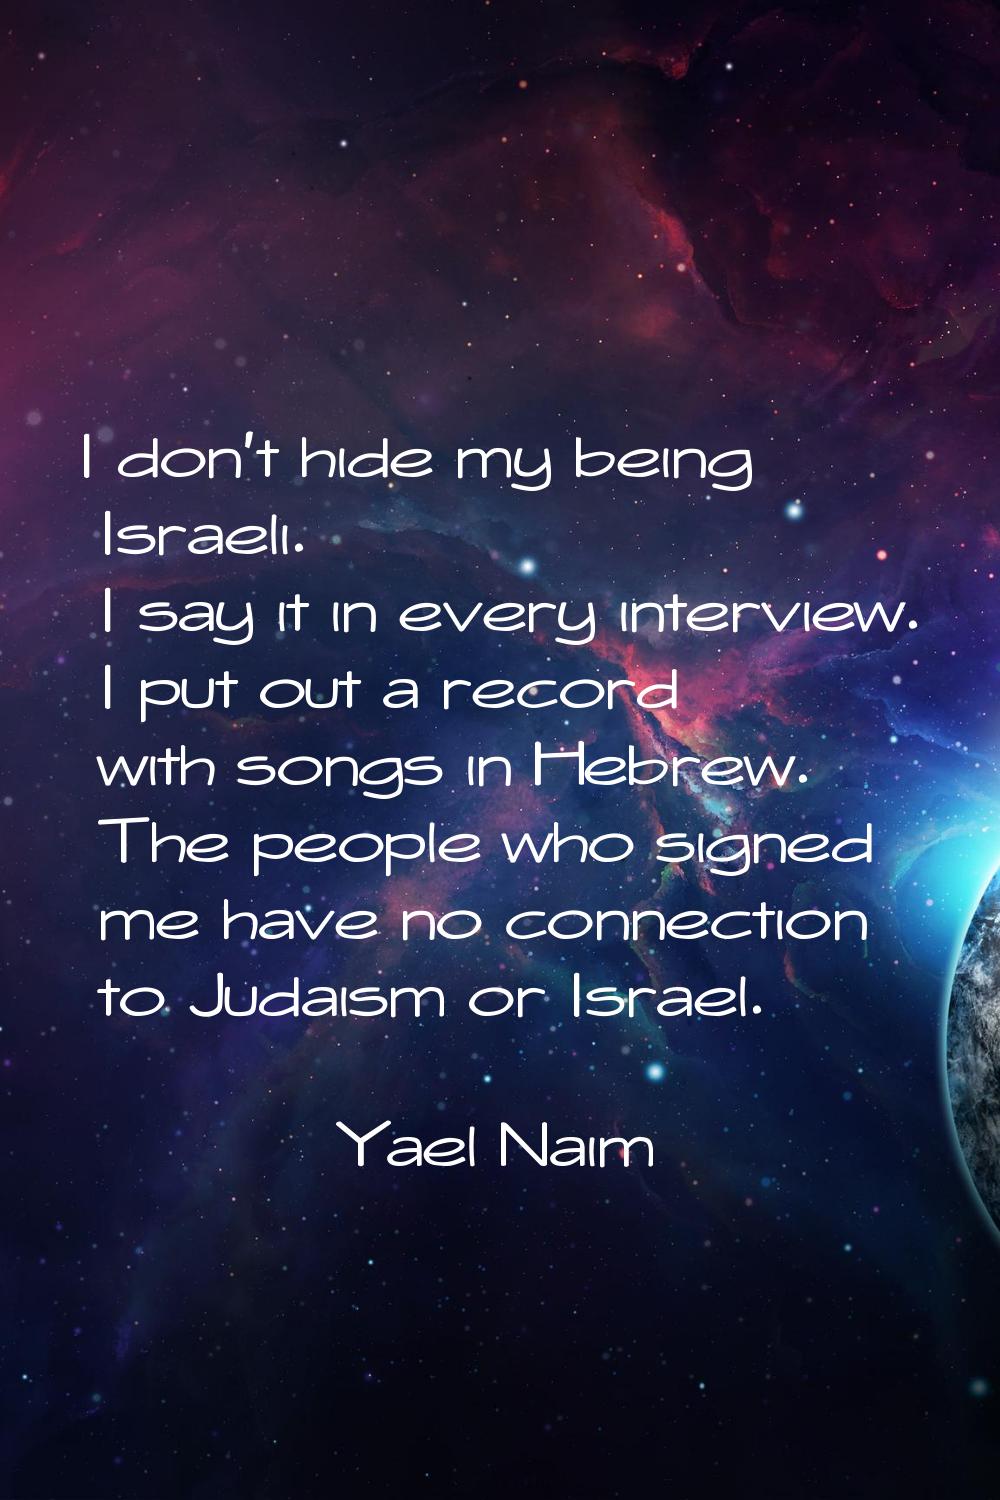 I don't hide my being Israeli. I say it in every interview. I put out a record with songs in Hebrew